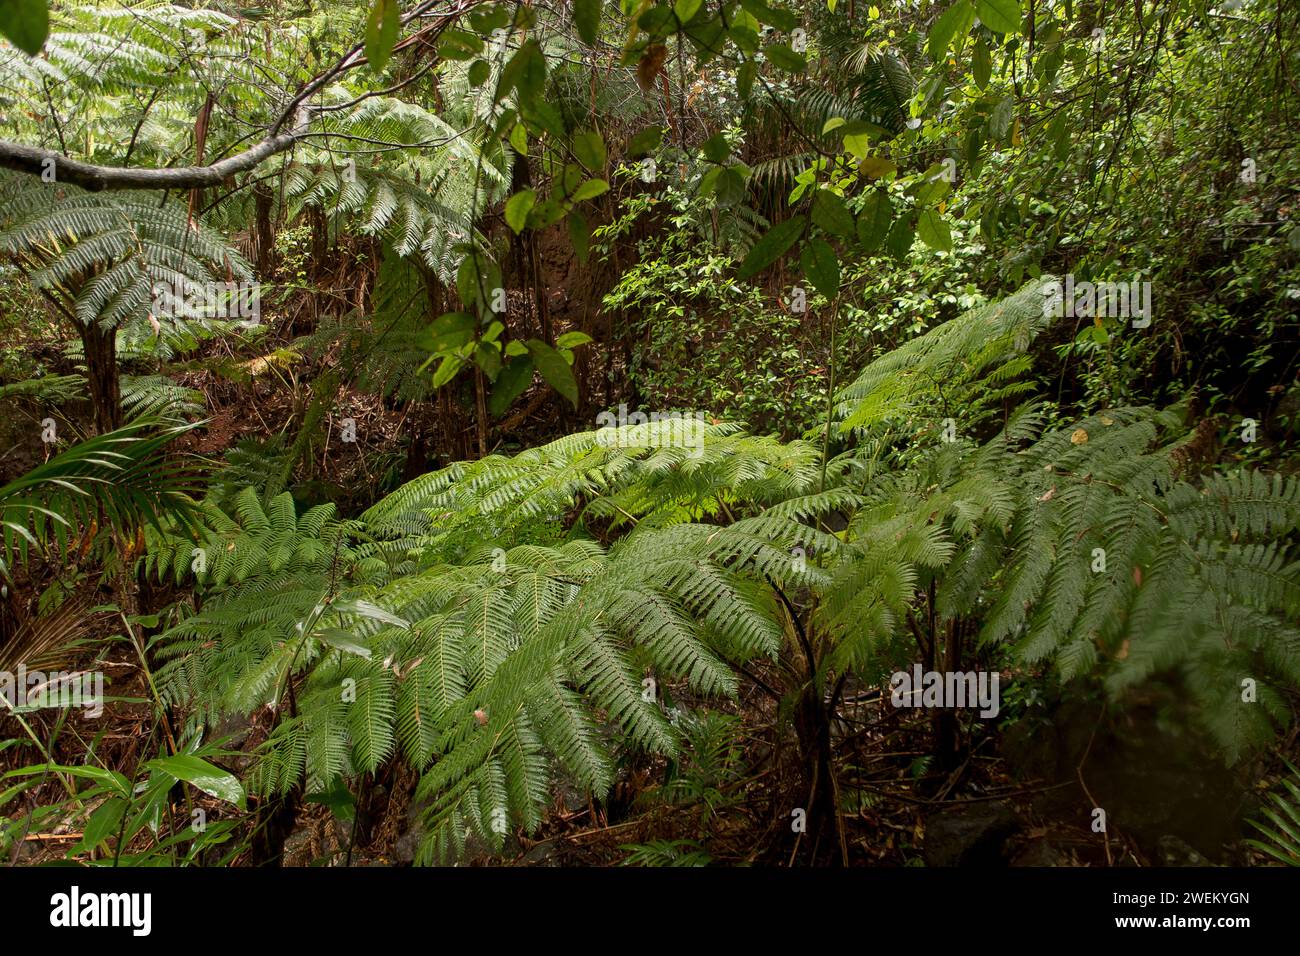 Looking across the top of an Australian tree fern, Cyathea cooperi, growing in a gully in subtropical rainforest, Queensland. Stock Photo